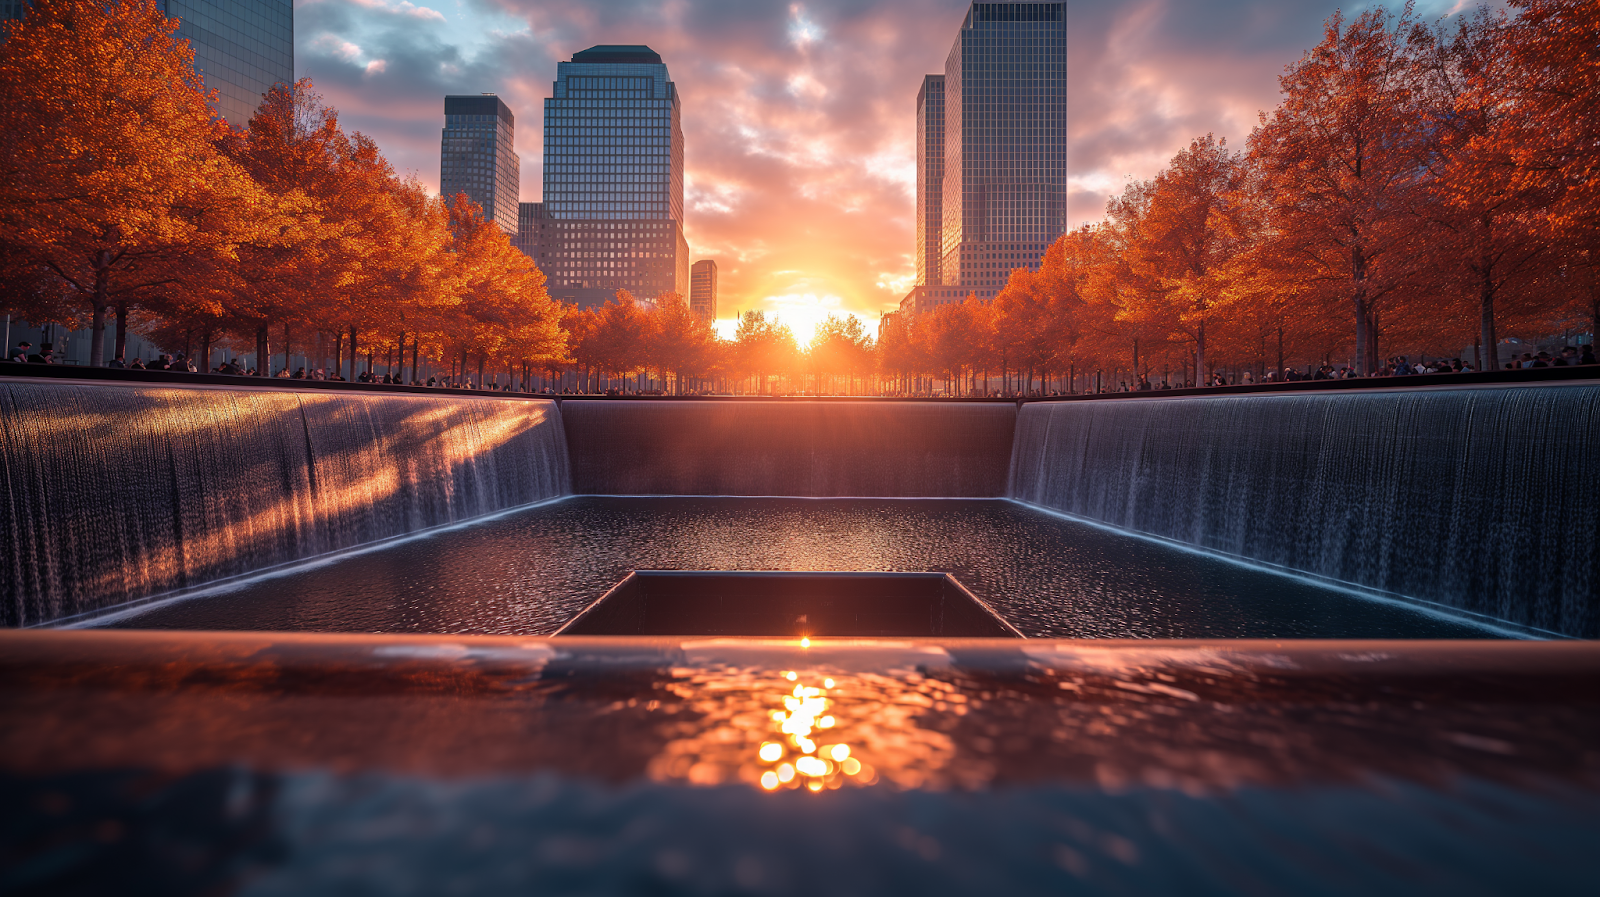 The 911 Memorial located at the World Trade Center in New York City